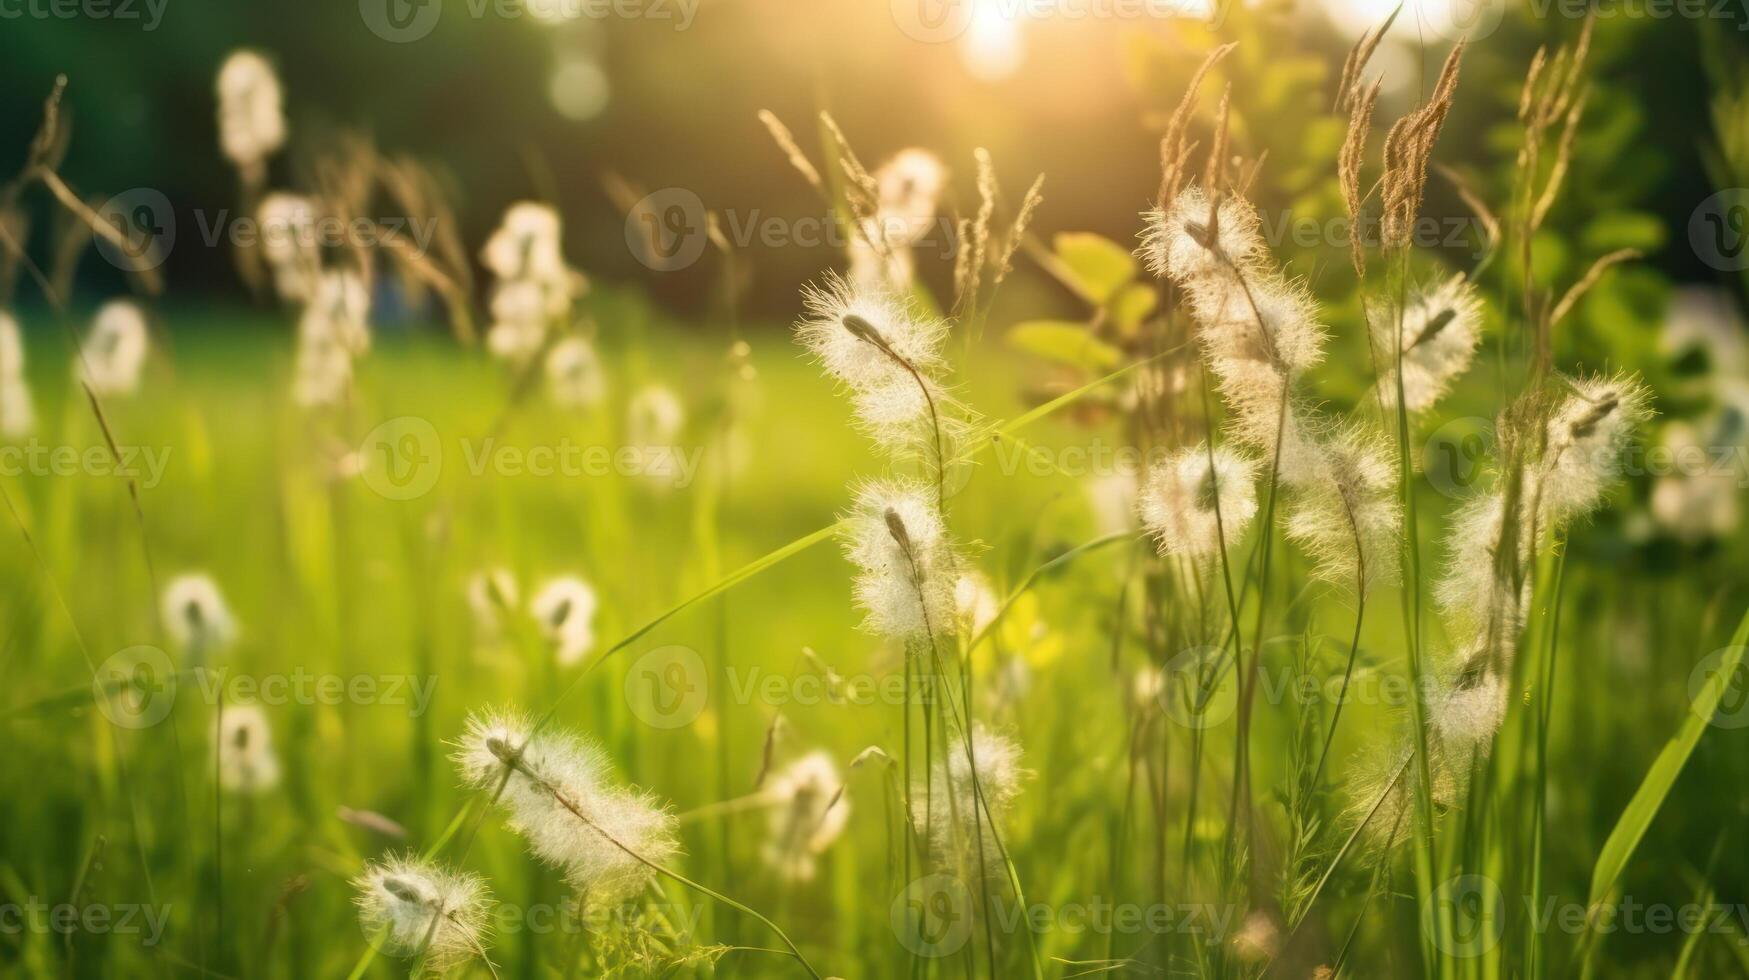 The sun sets in the background of a vast field of grass, casting a warm light over the landscape photo